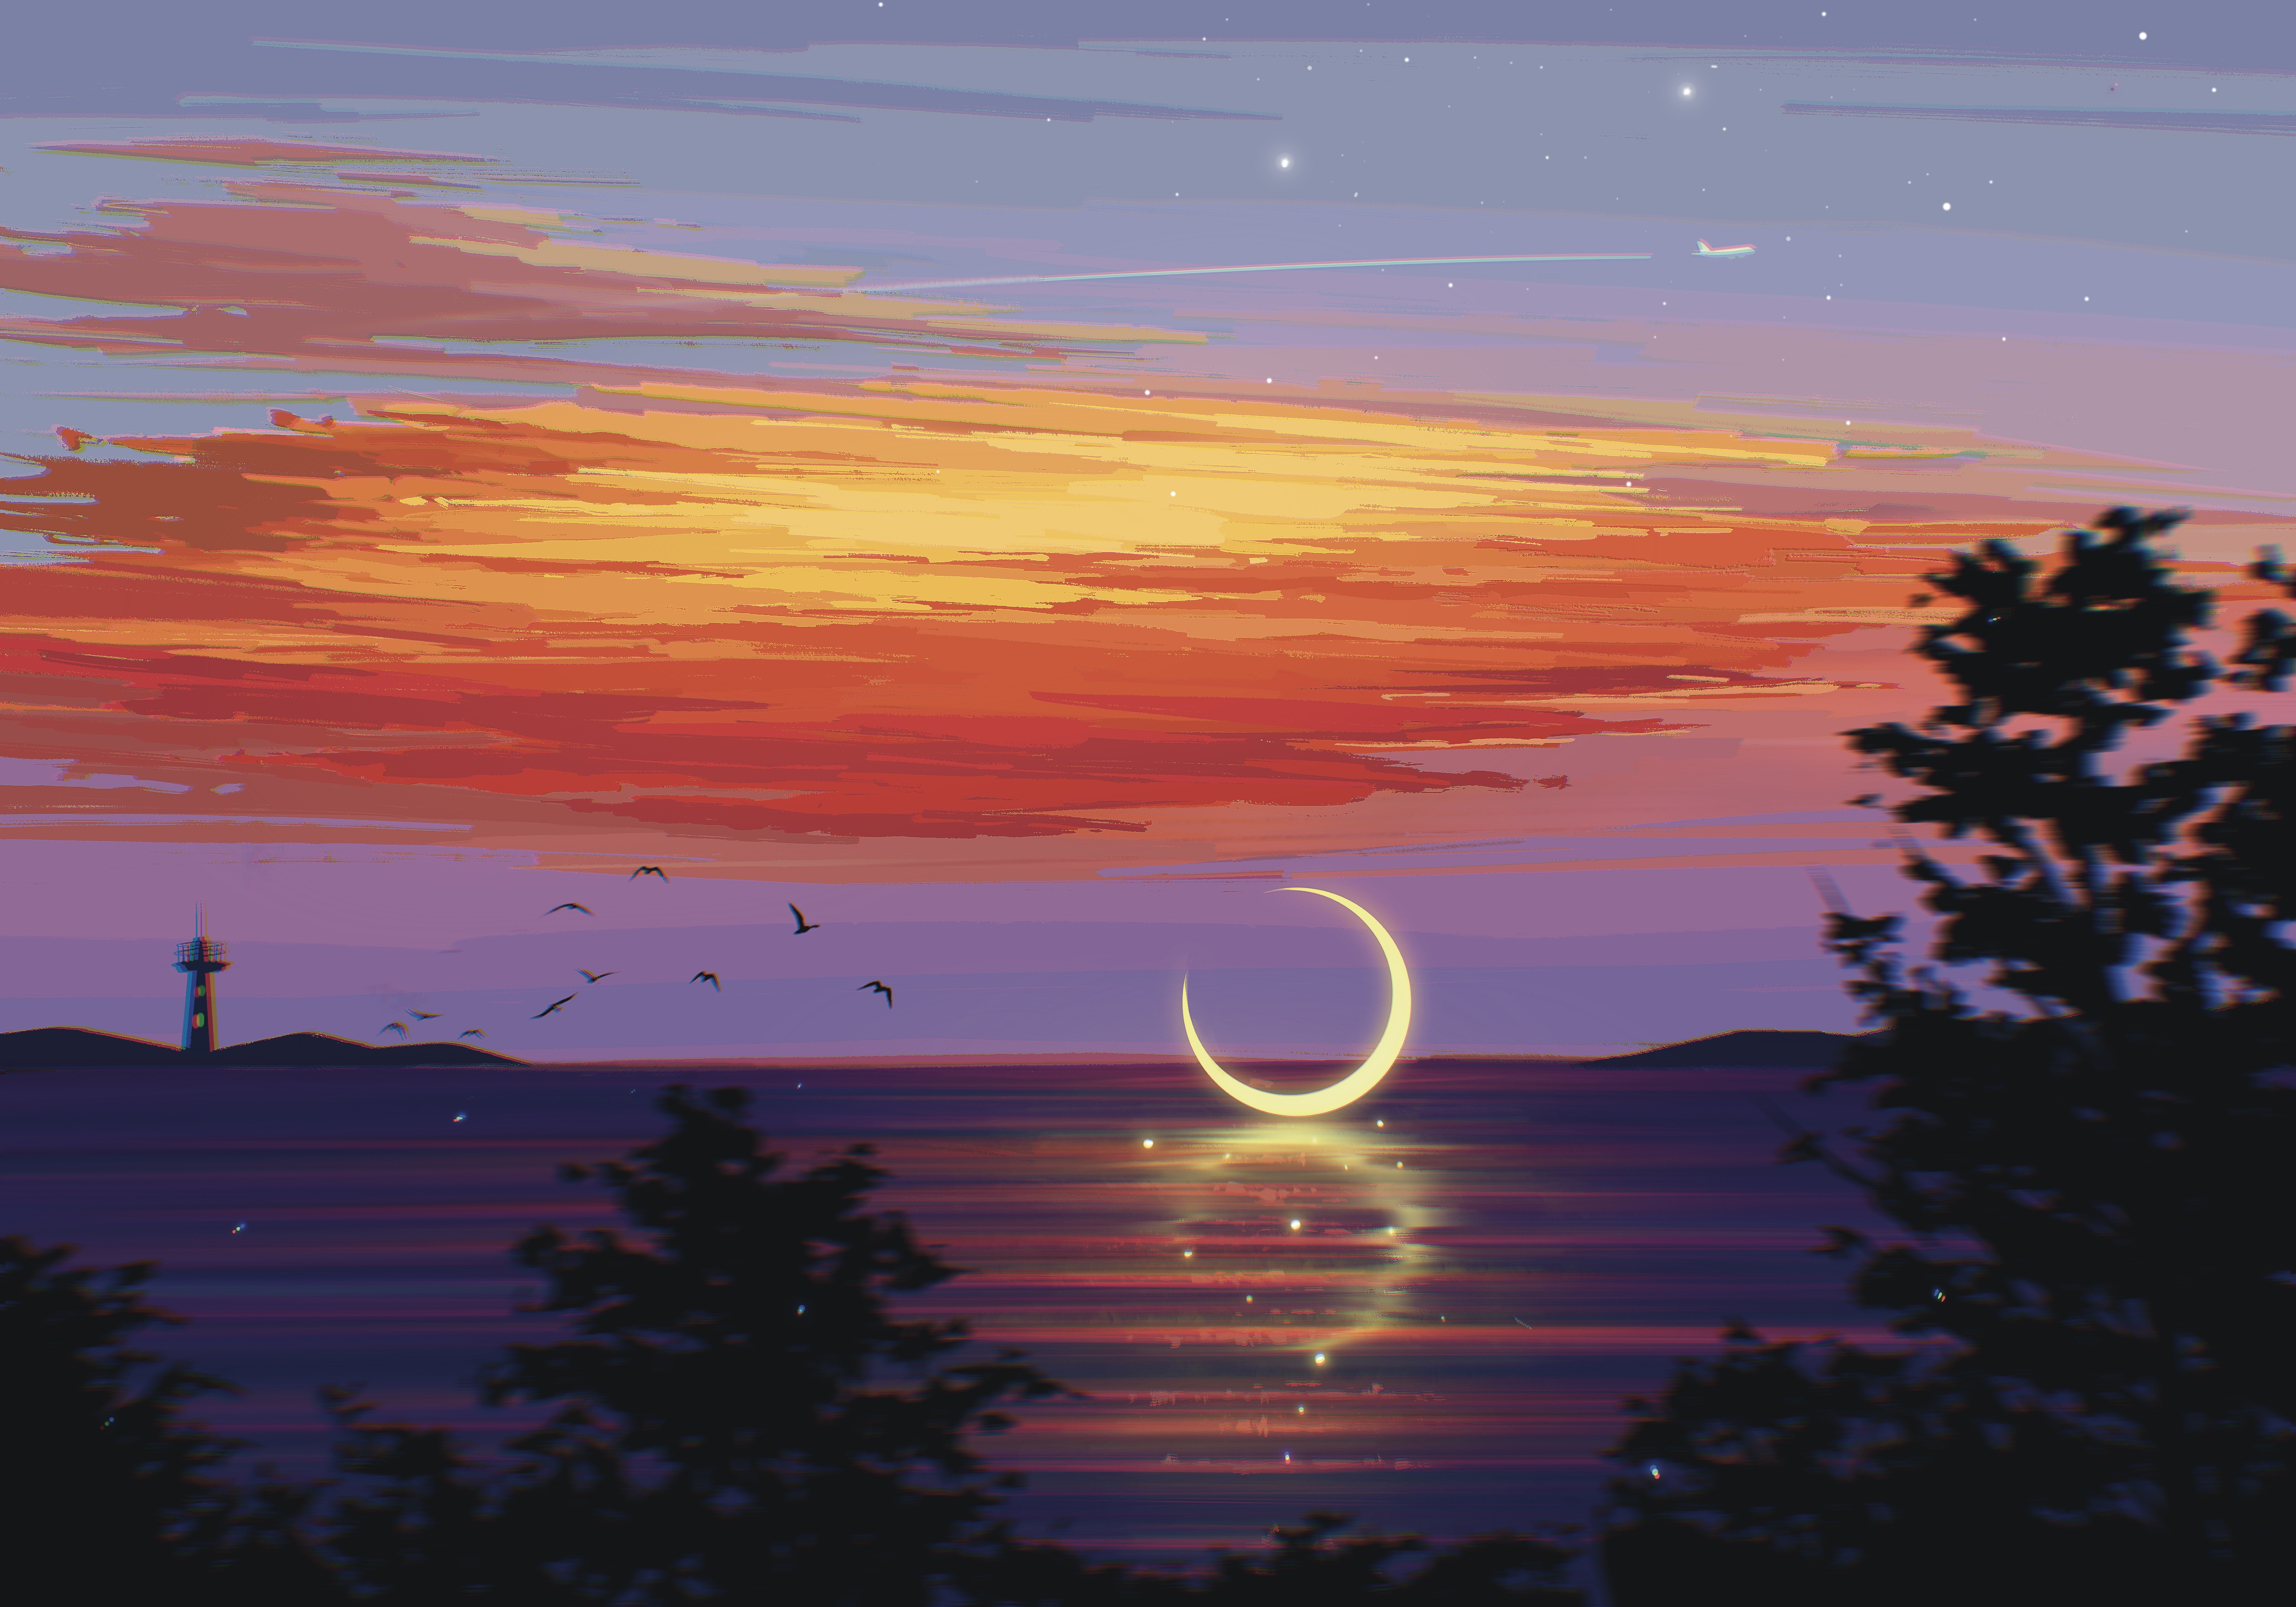 General 4724x3307 digital art artwork illustration painting landscape sea water clouds Moon birds trees sunset airplane lighthouse crescent moon sunset glow